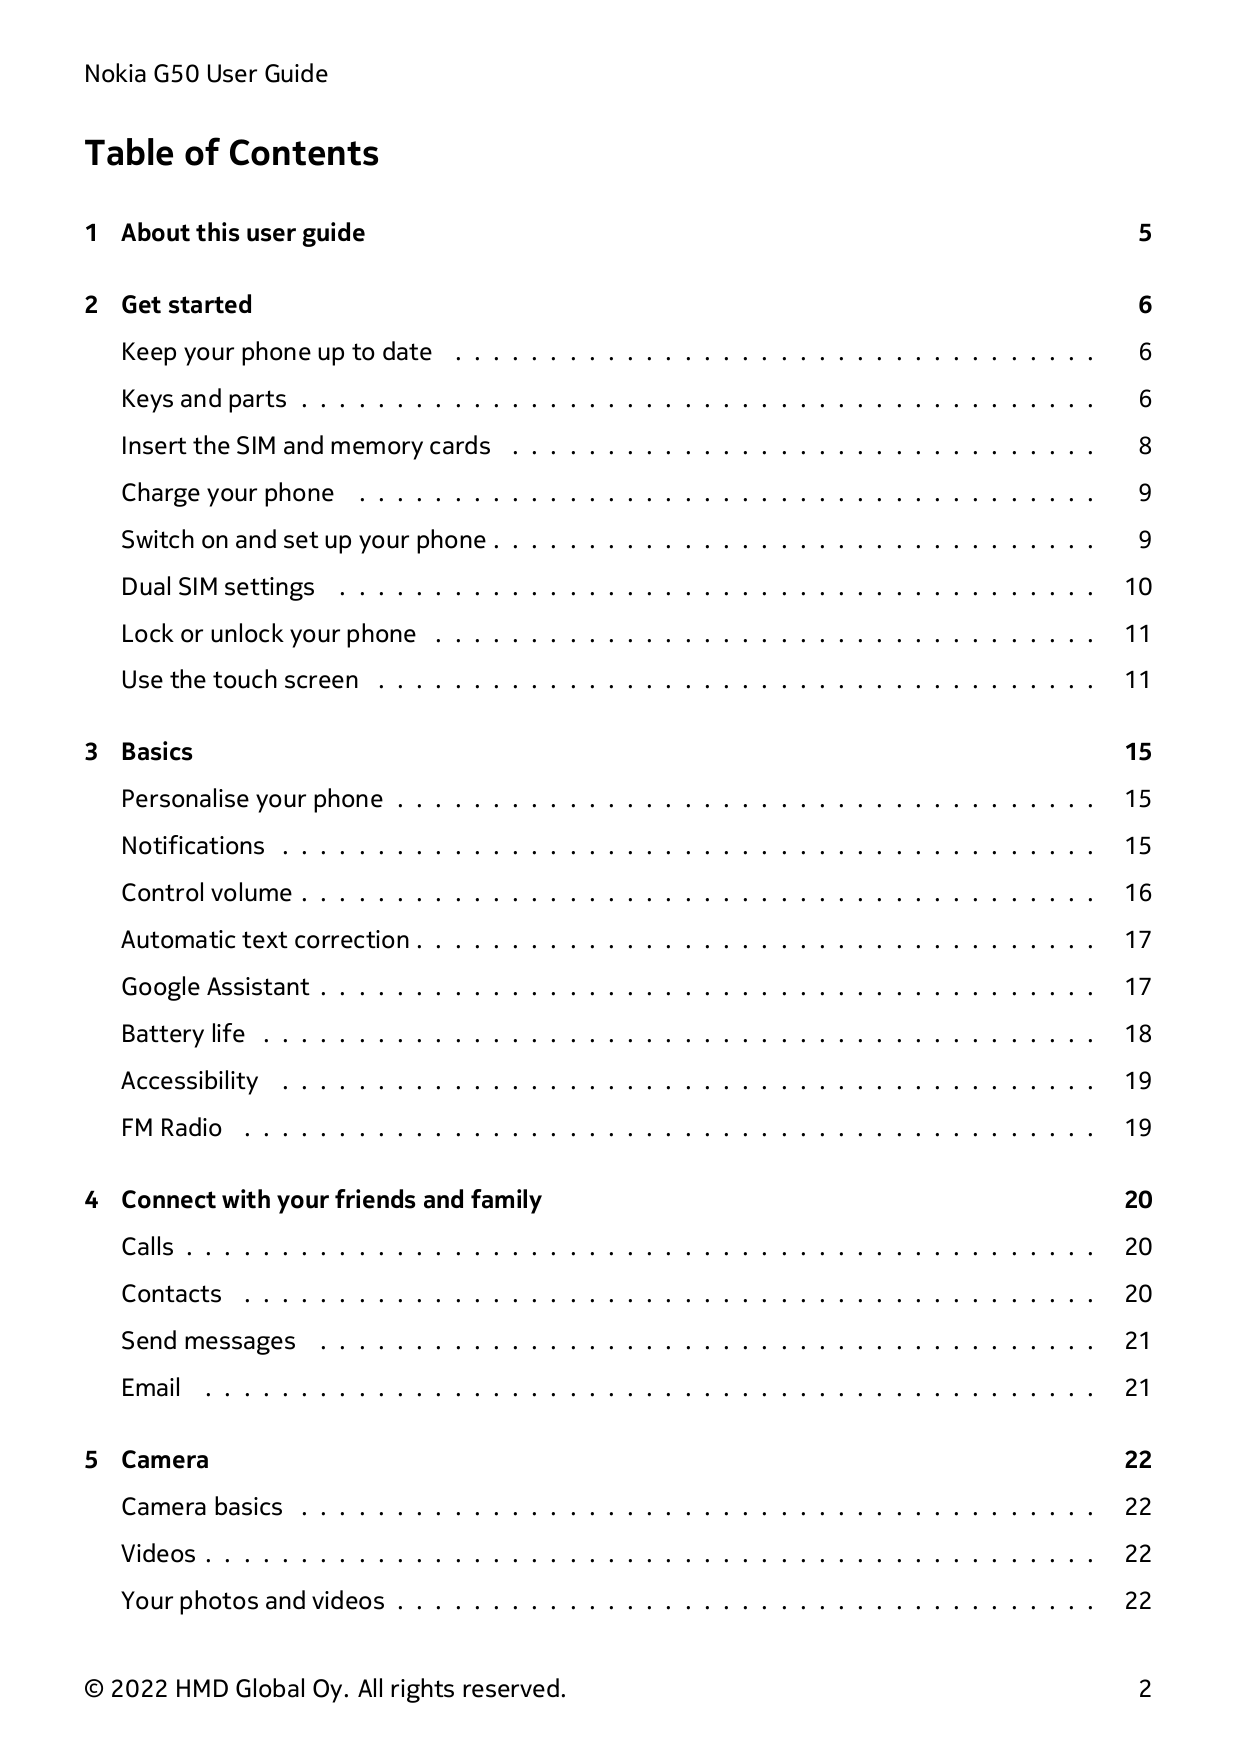 Nokia G50 User GuideTable of Contents1 About this user guide52 Get started6Keep your phone up to date . . . . . . . . . . . . . 